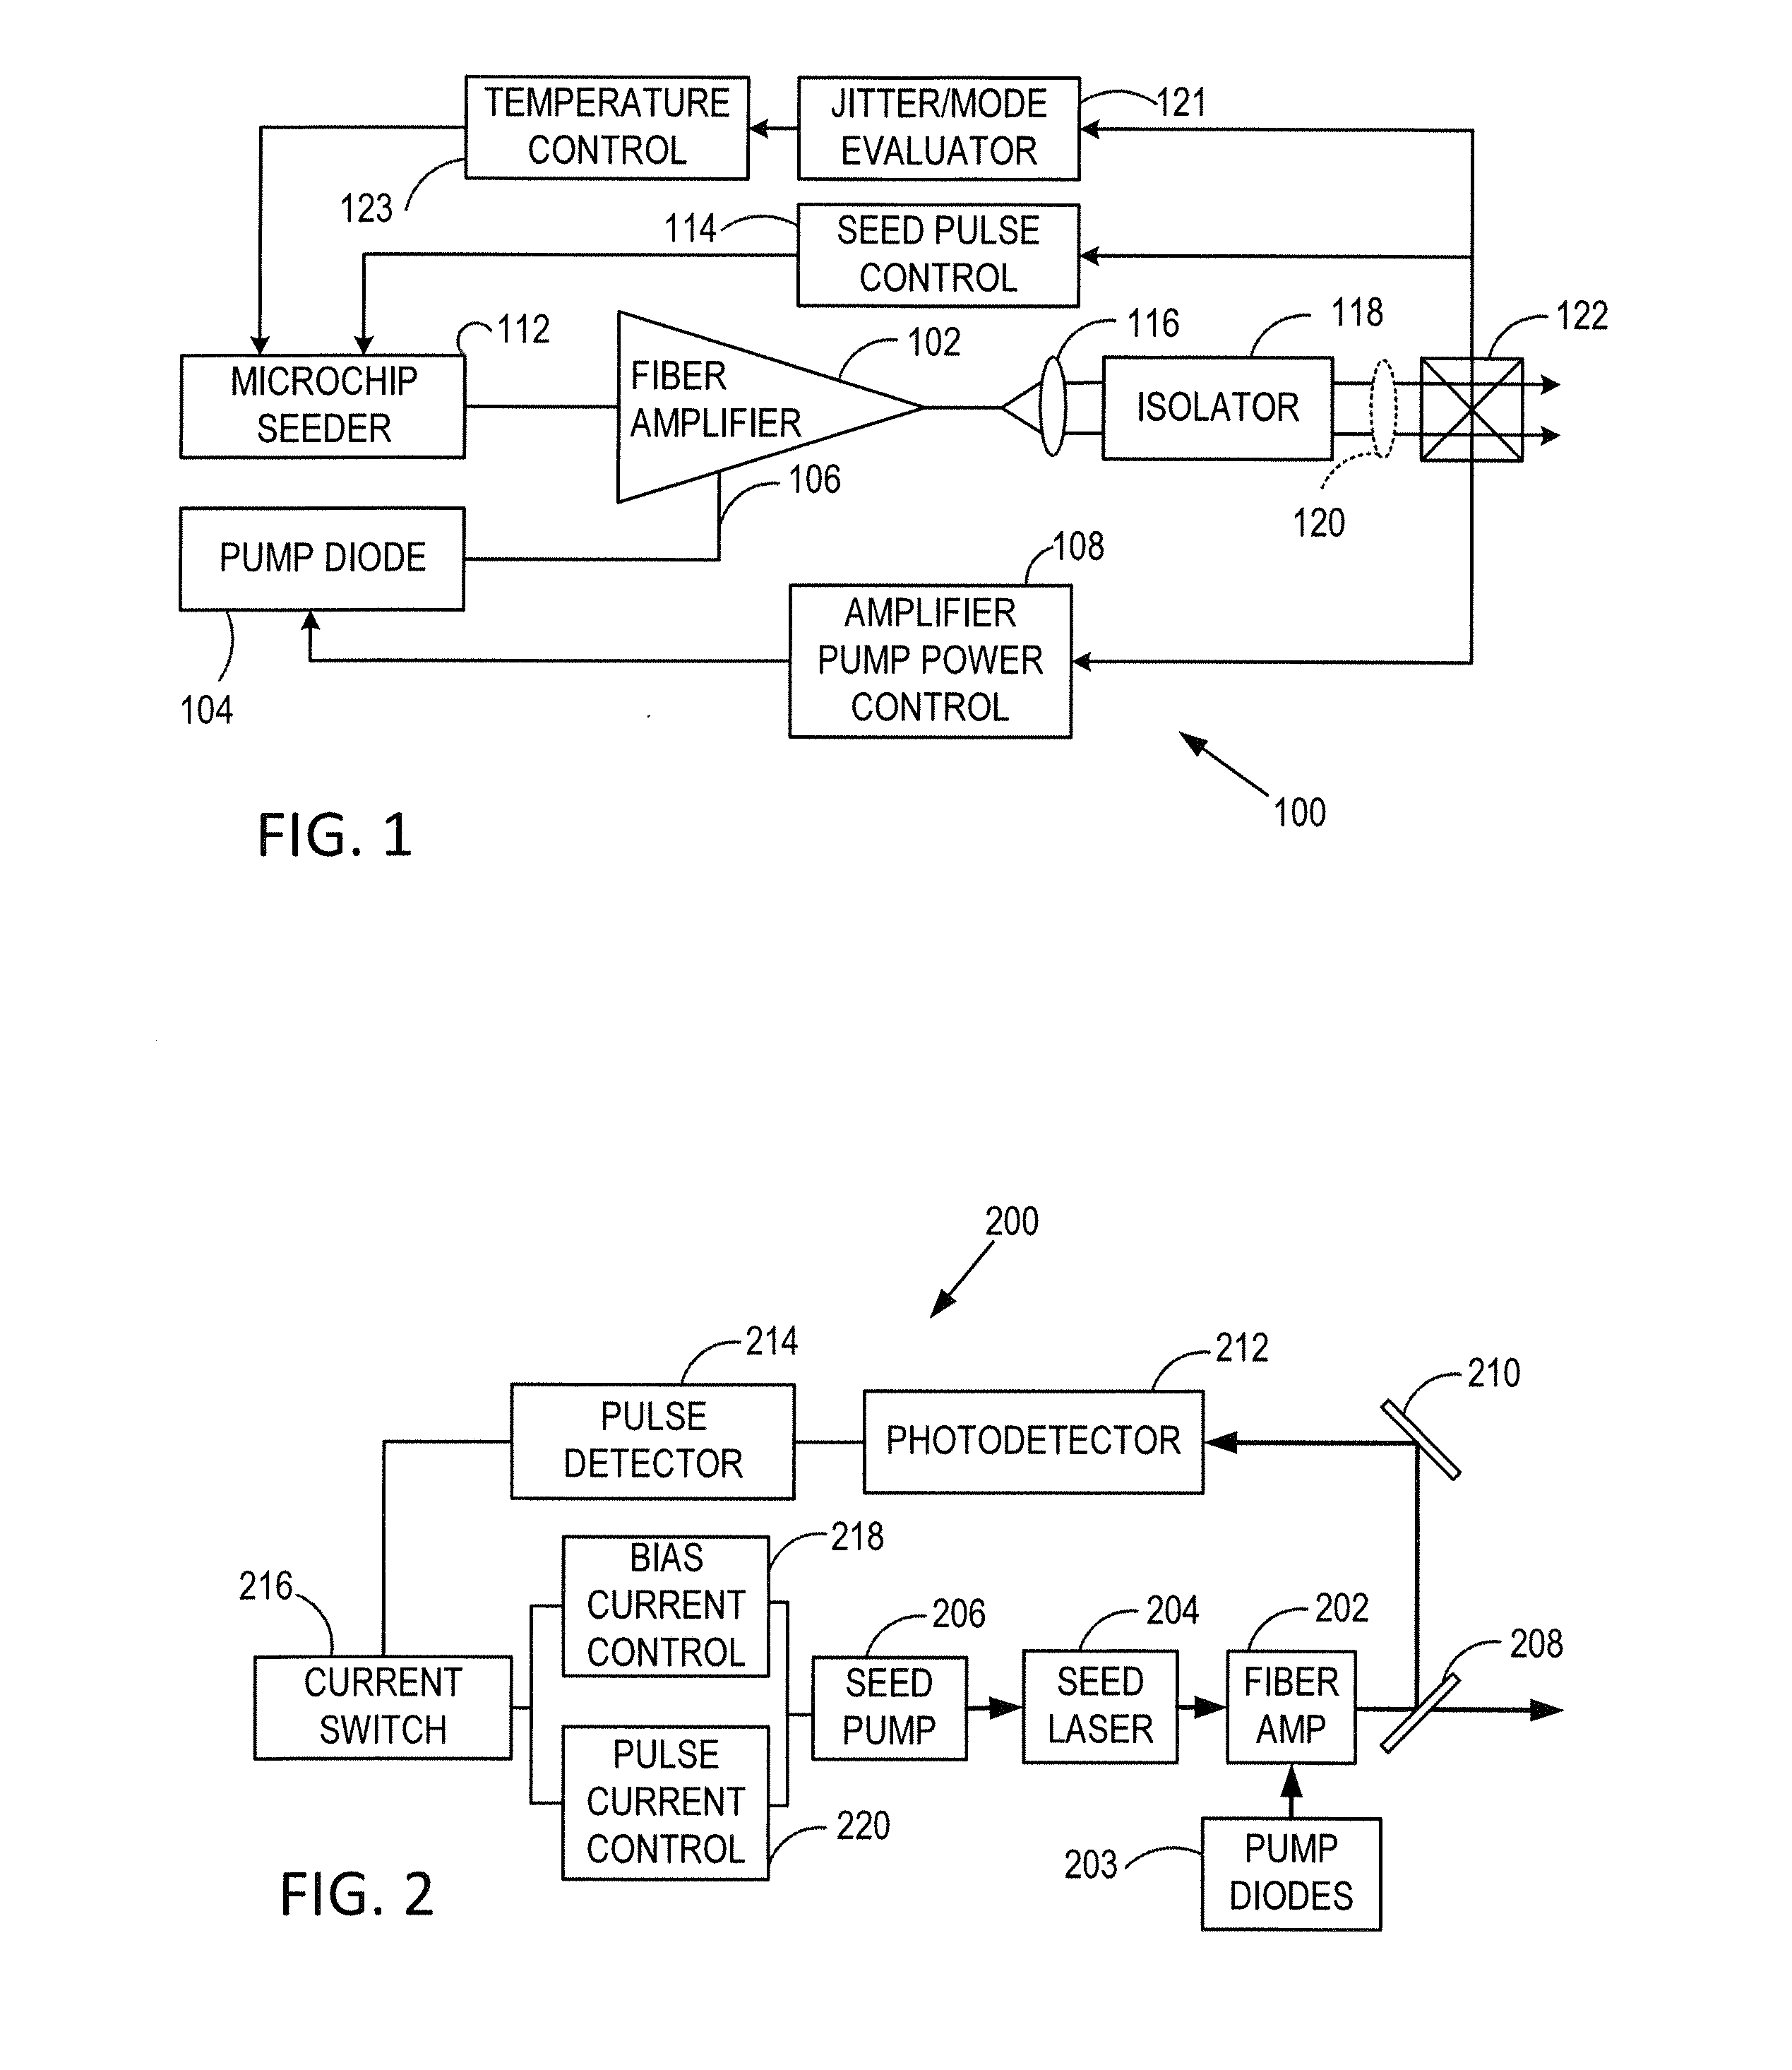 Method for actively controlling the optical output of a seed laser